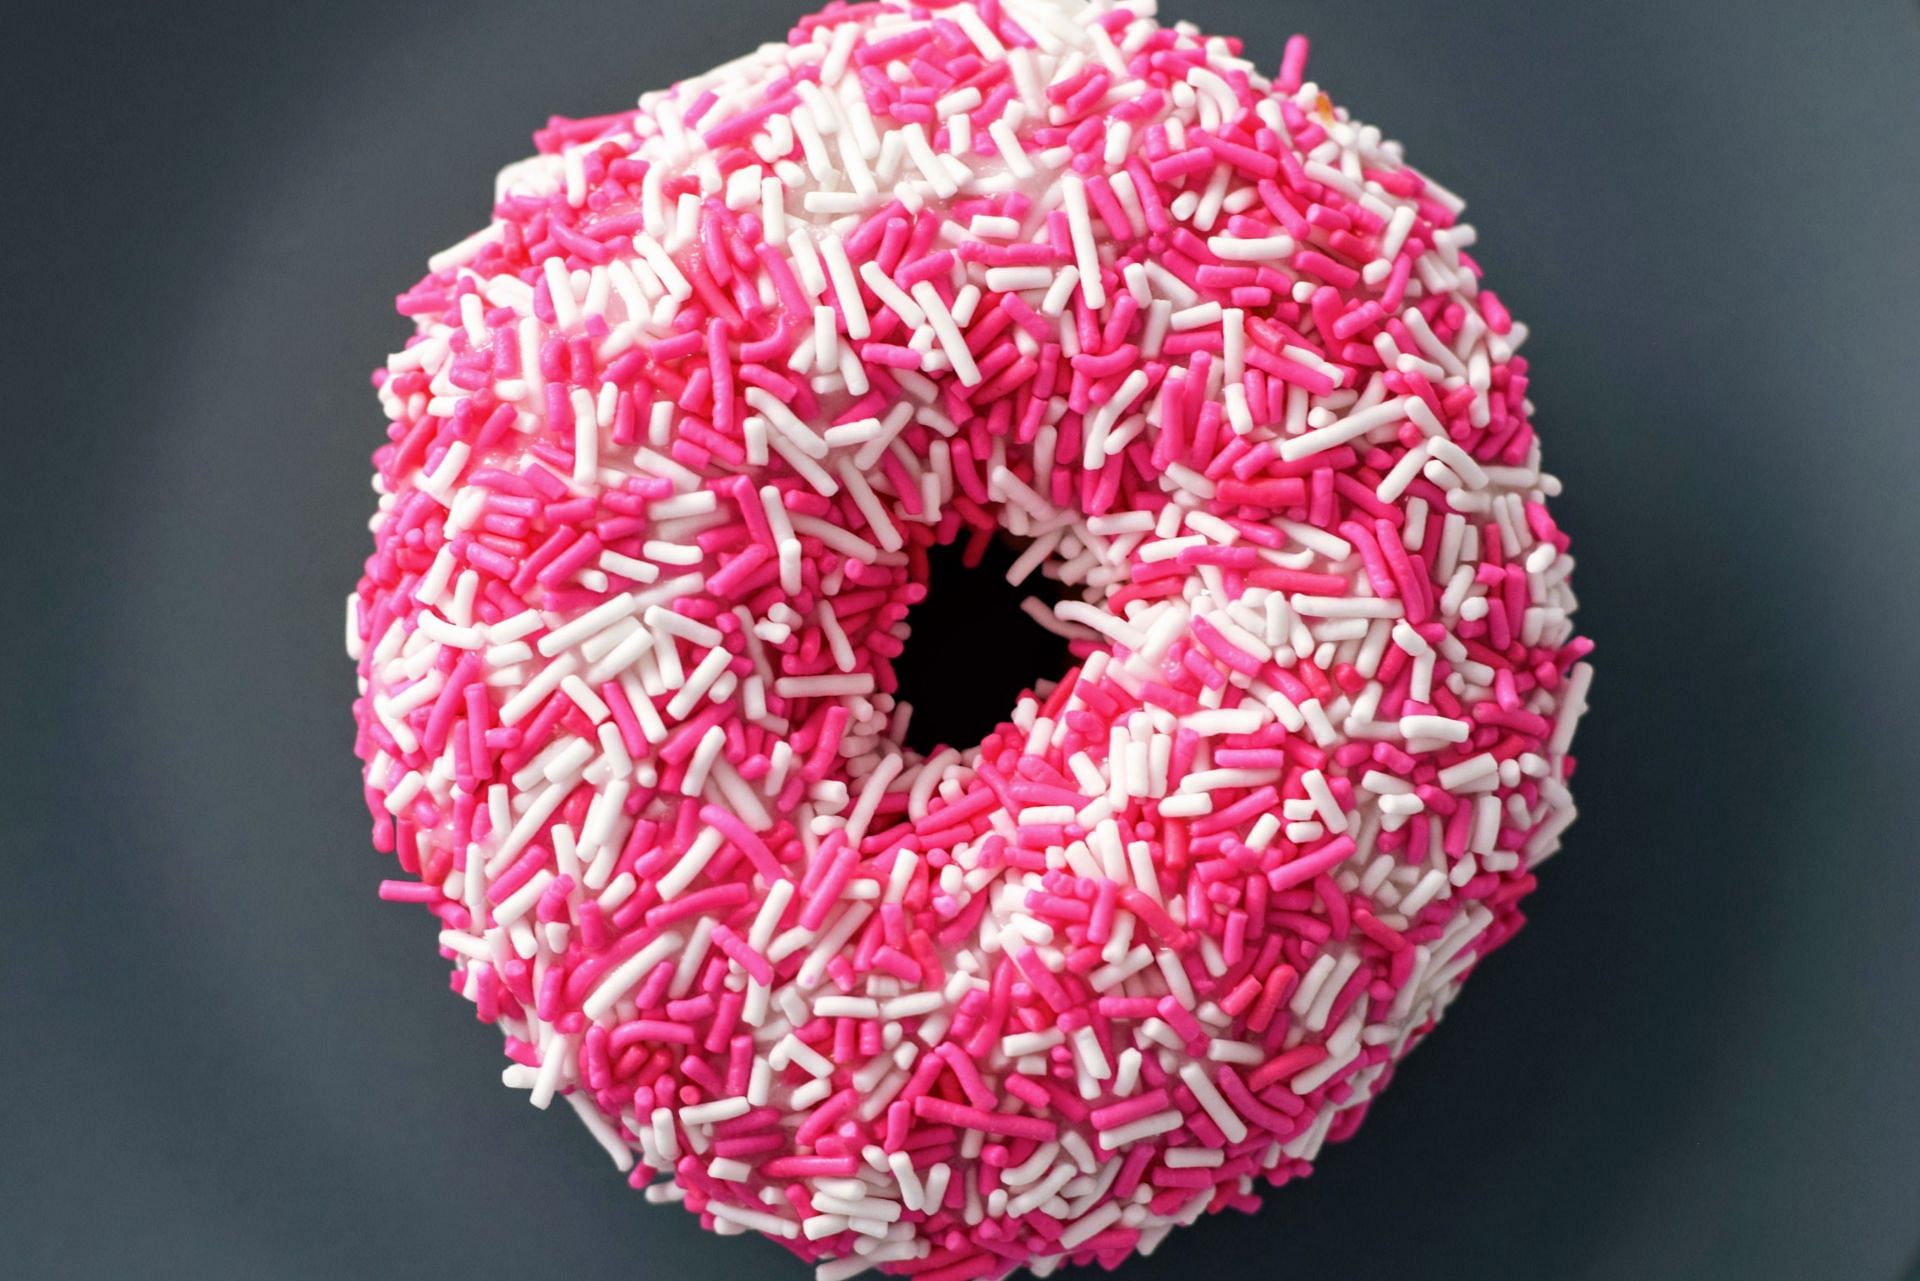 Stop eating sugar benefits (image sourced via Pexels / Photo by time)